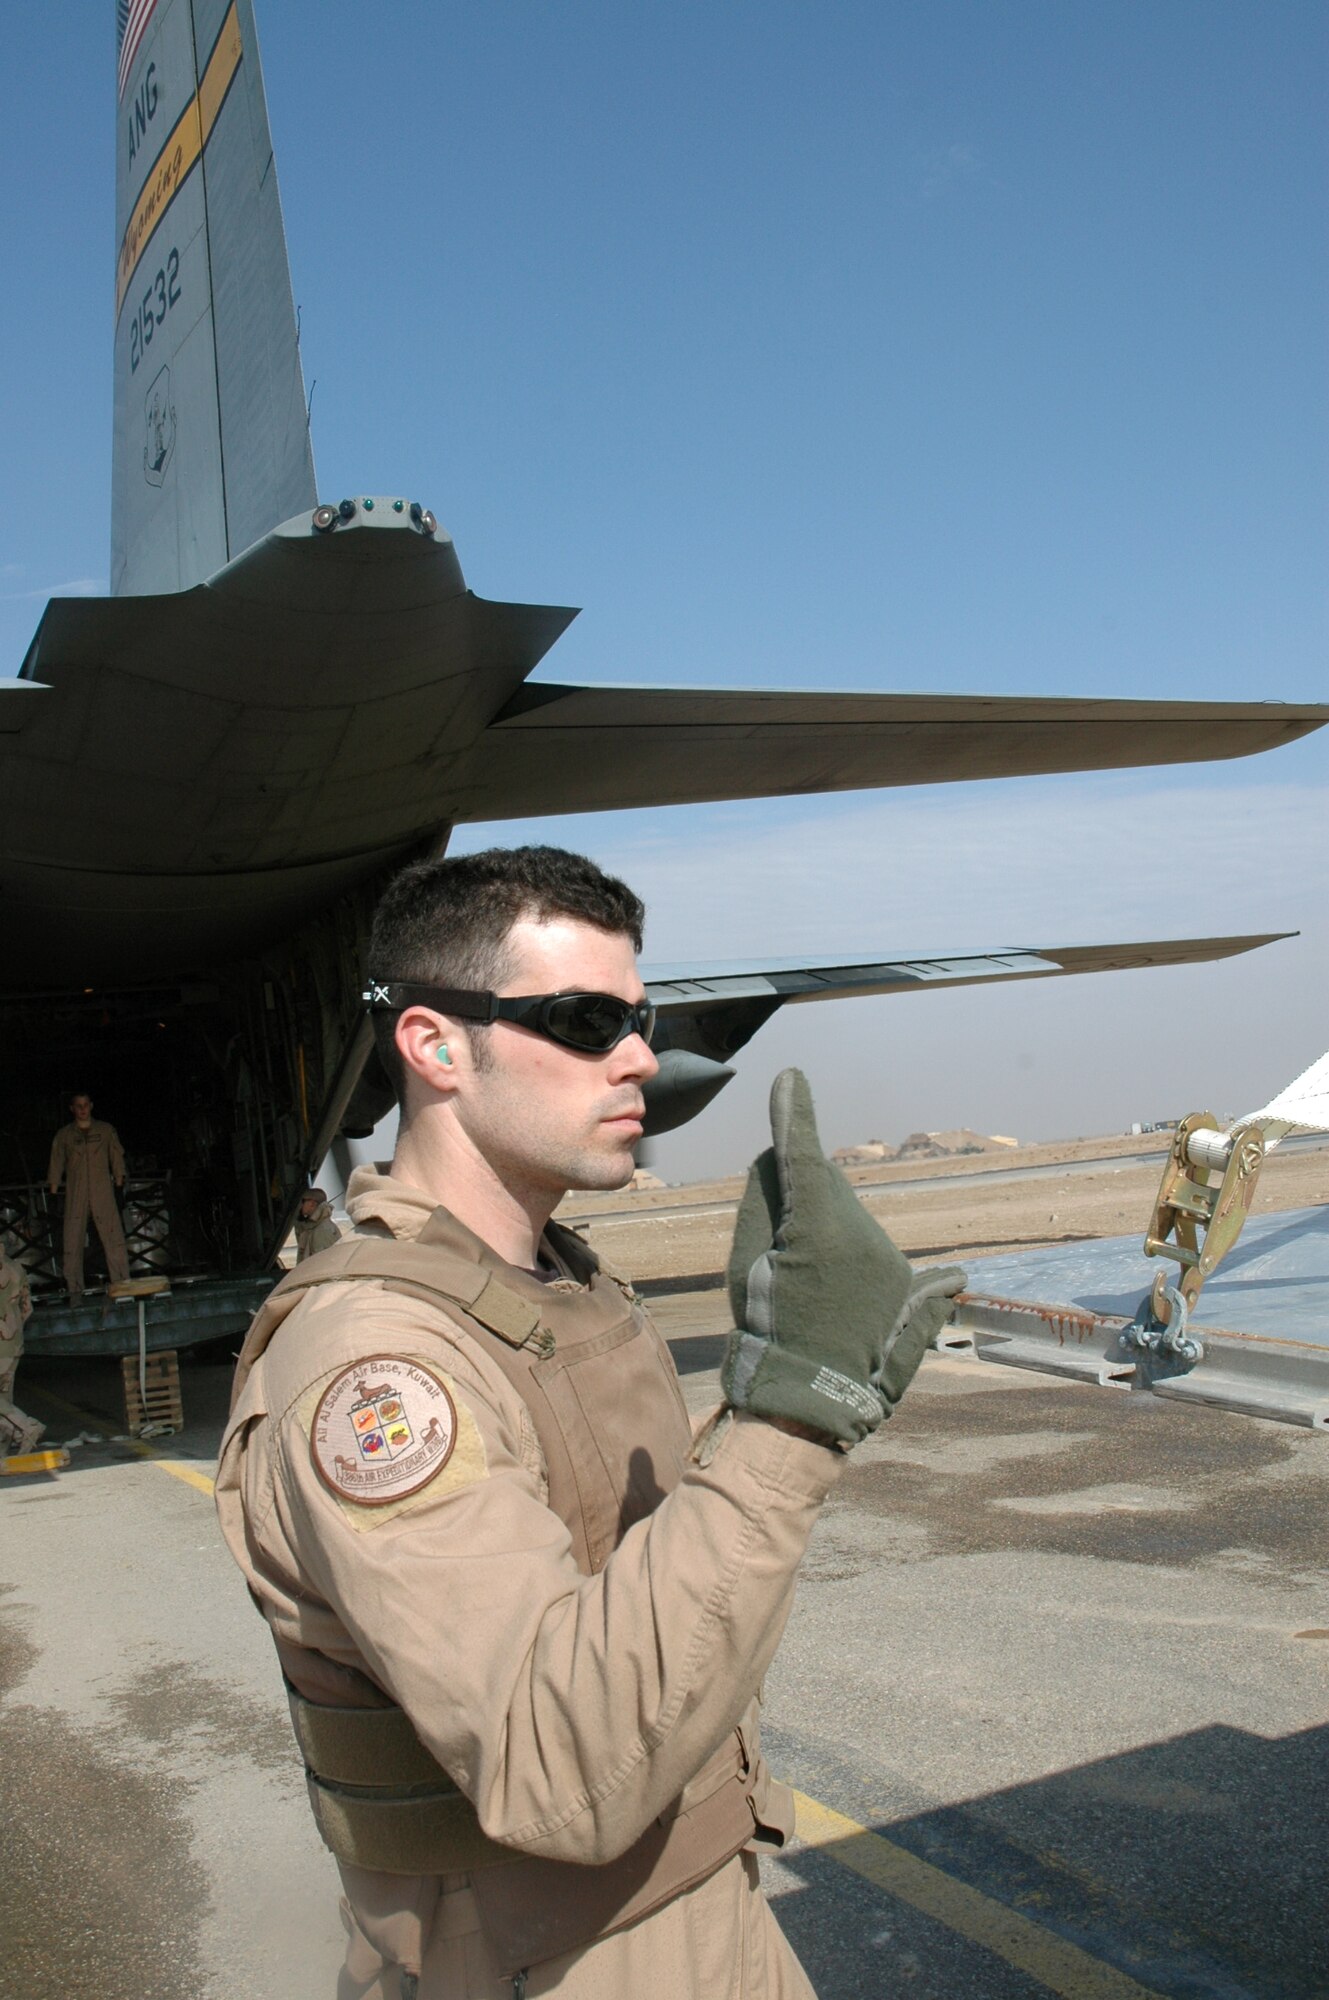 SOUTHWEST ASIA (AFPN) -- Senior Airman Jon Hall directs a forklift driver while loading a C-130 Hercules. He is a loadmaster with the 777th Airlift Expeditionary Squadron. (U.S. Air Force photo by 1st Lt. Jon Quinlan) 

